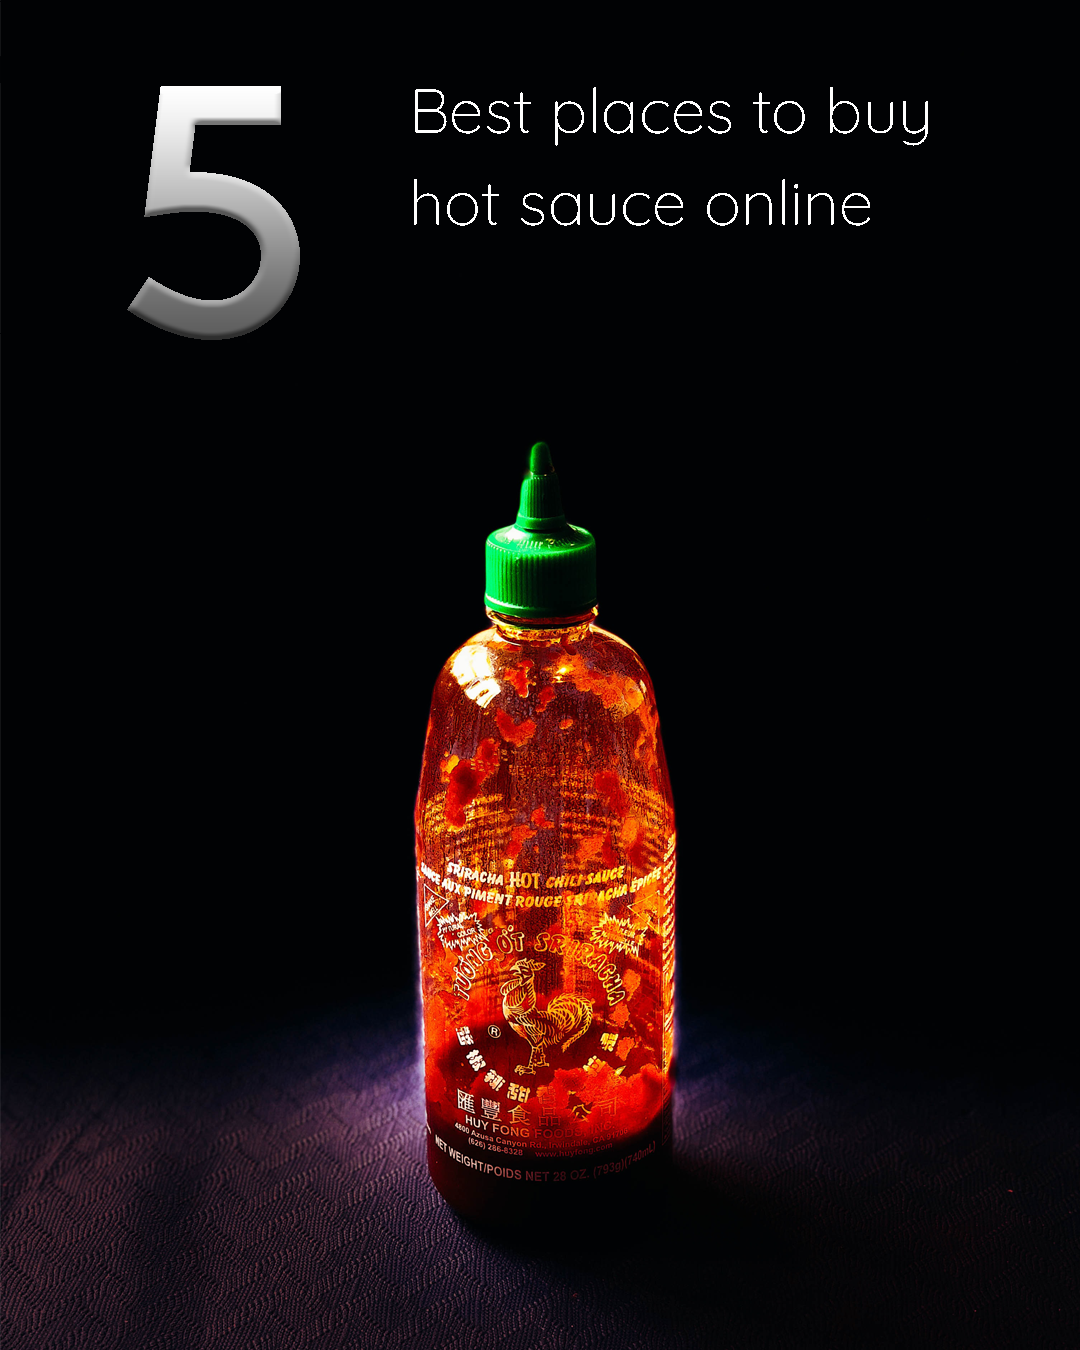 The 5 best places to buy hot sauce online in the UK